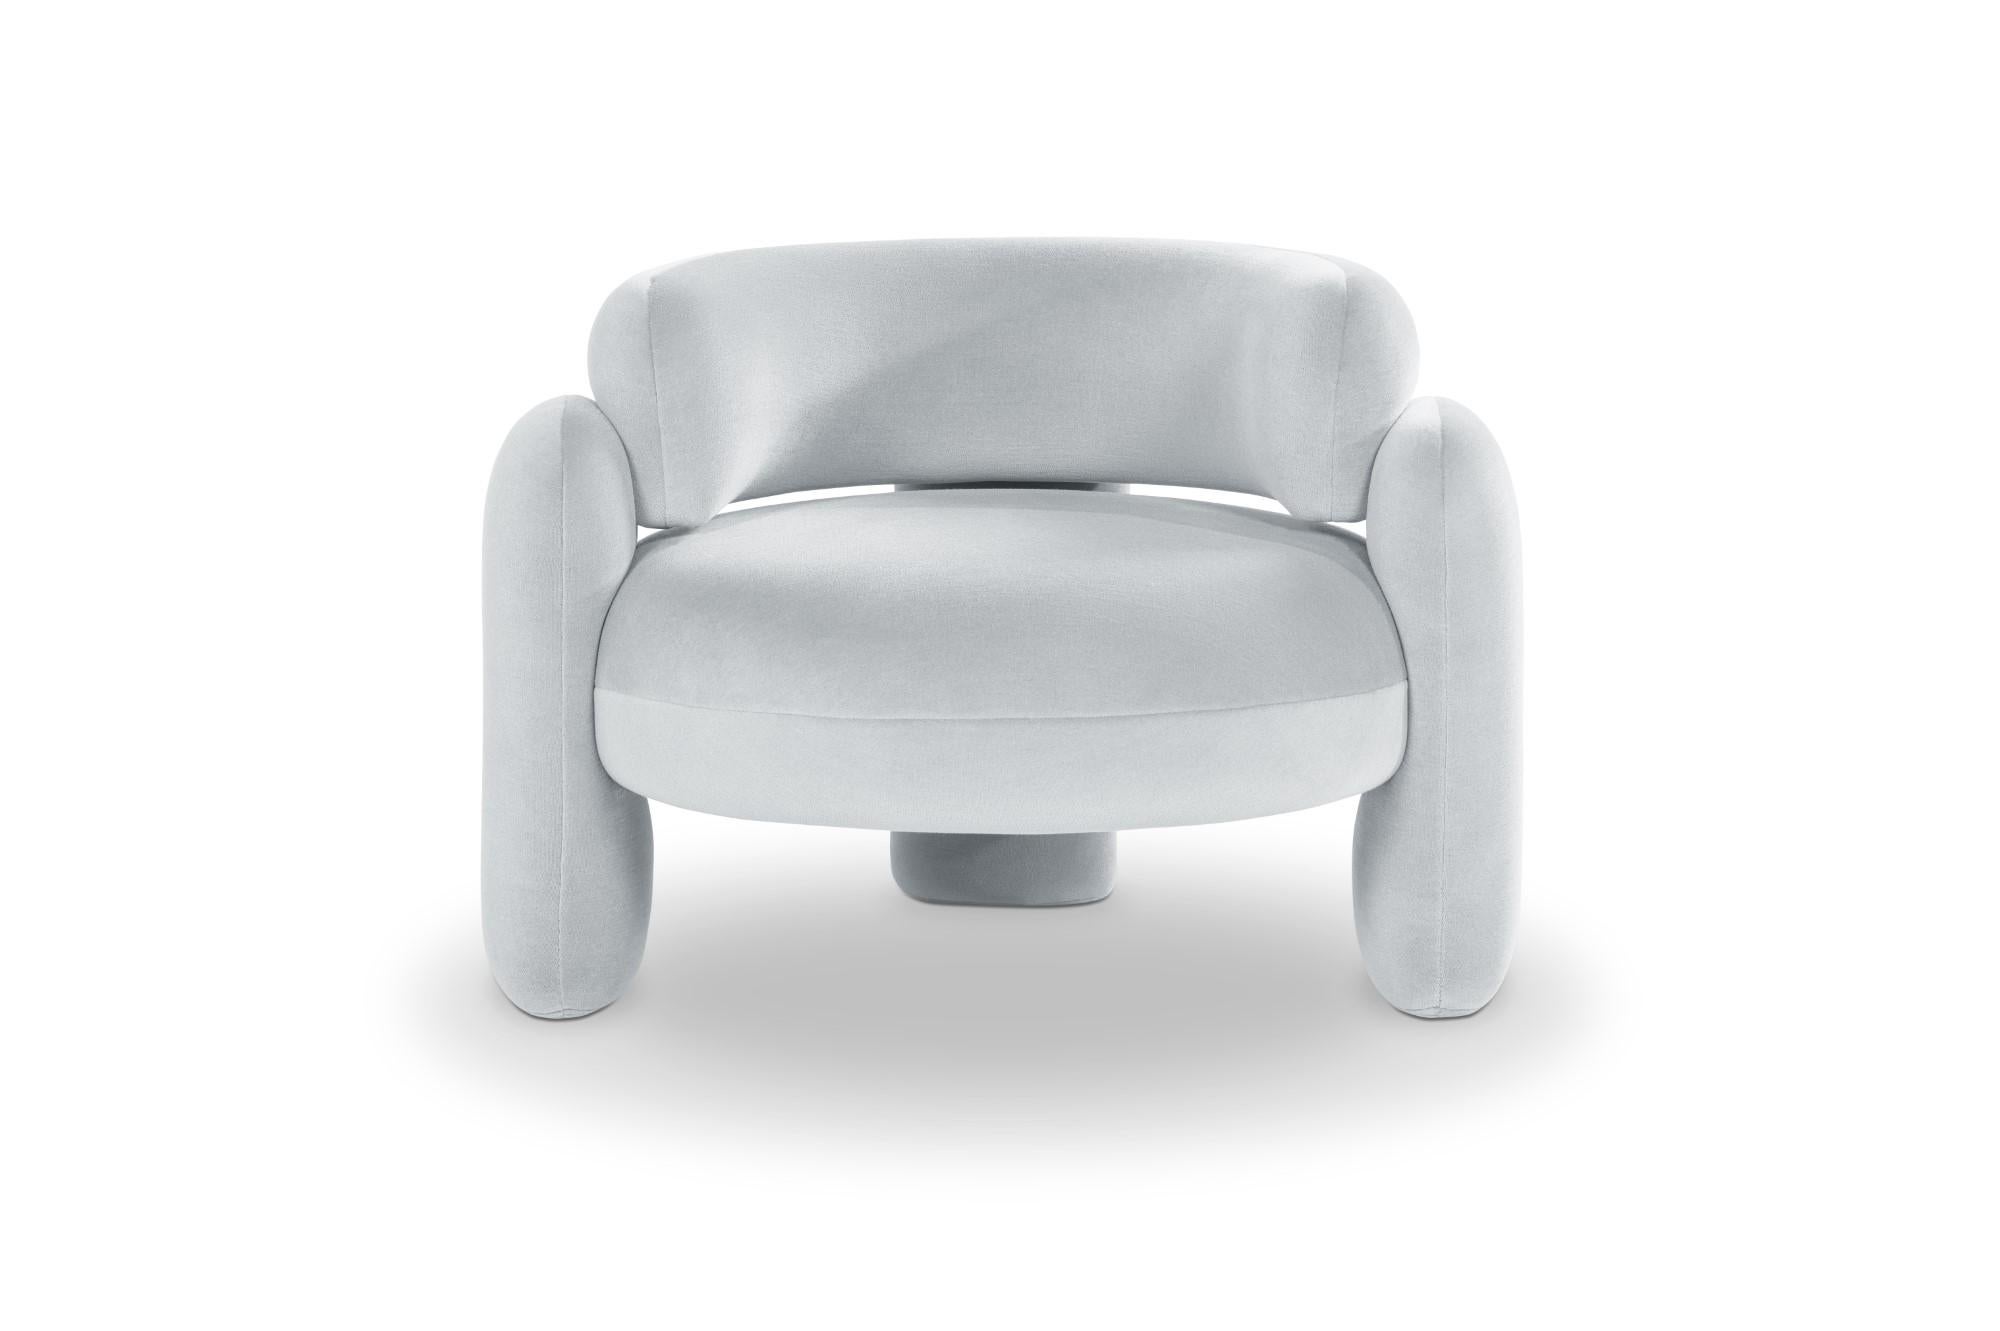 Embrace gentle 113 armchair by Royal Stranger 
Dimensions: W 96 x D 85 x H 68 cm.
Different upholstery colors and finishes are available.
Materials: Upholstery.

Featuring an enfolding composition of geometrical shapes, the Embrace Armchair